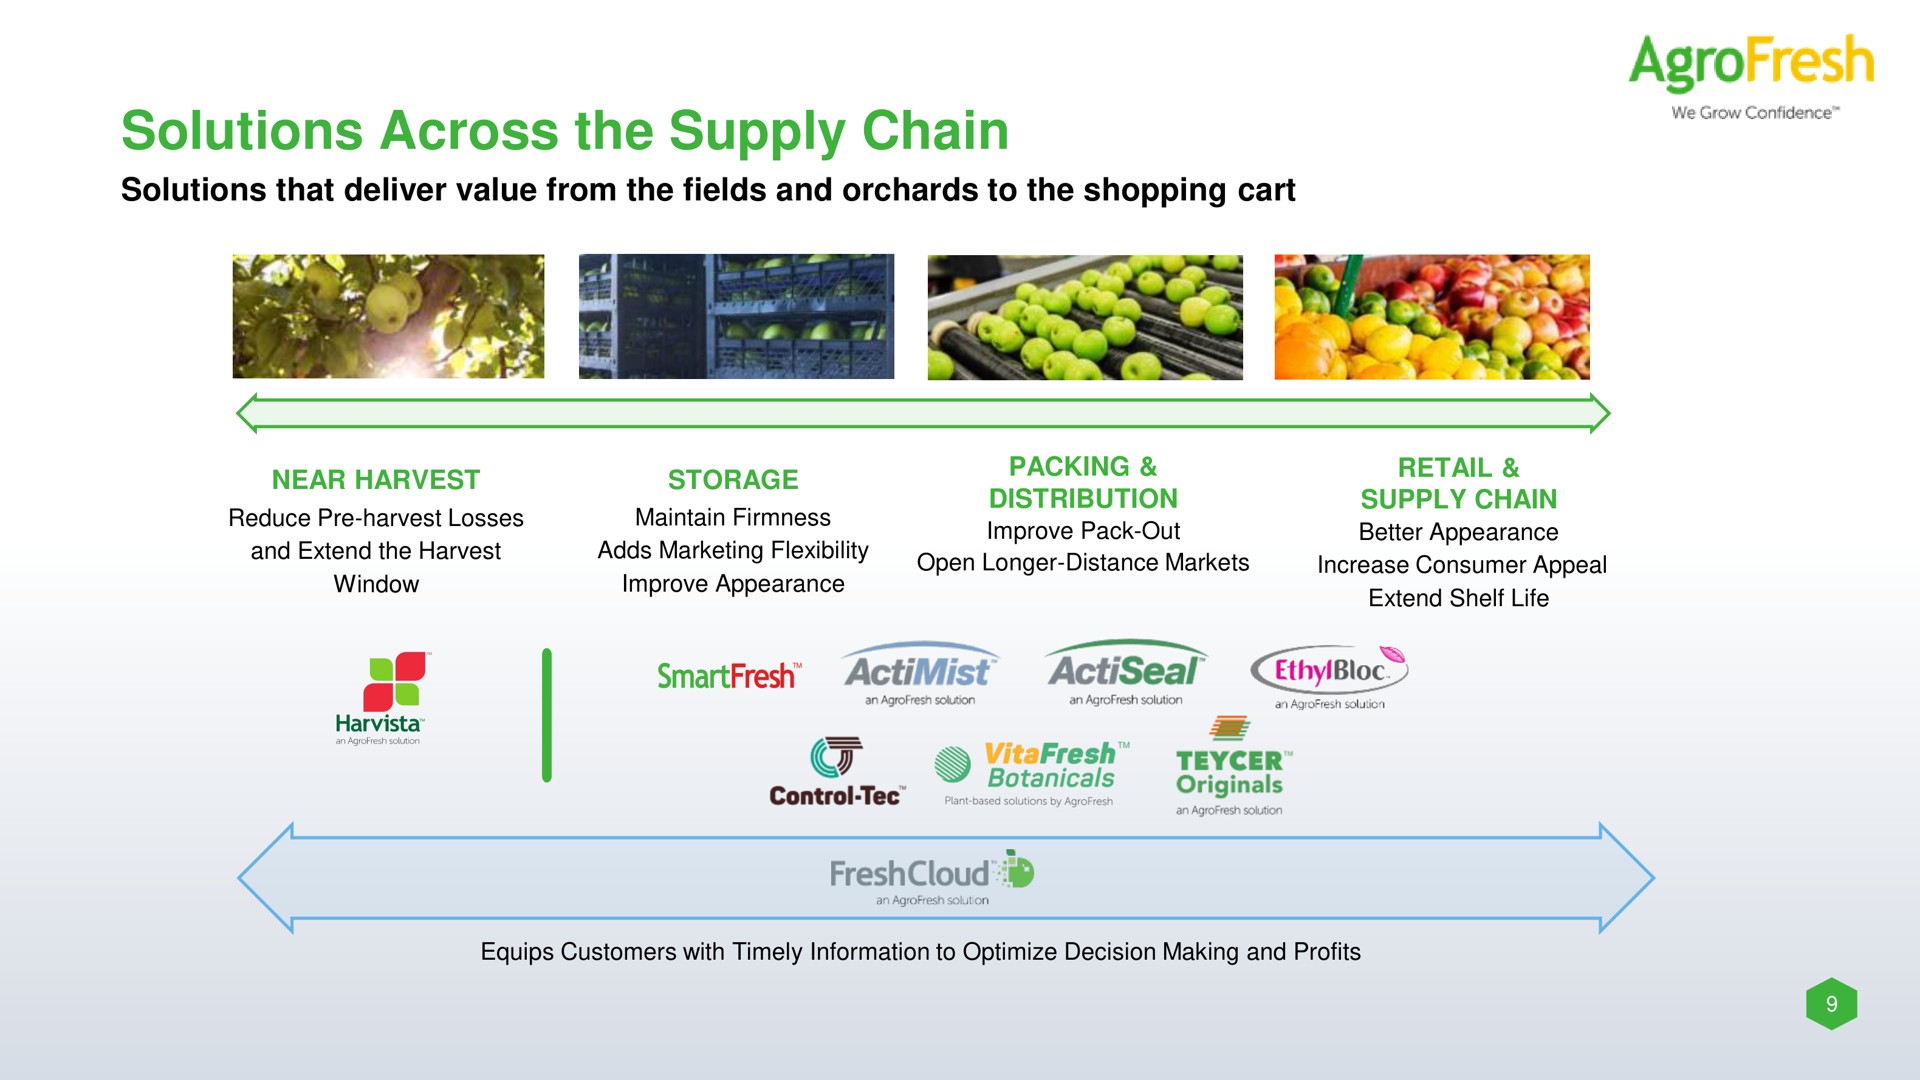 solutions across the supply chain | AgroFresh